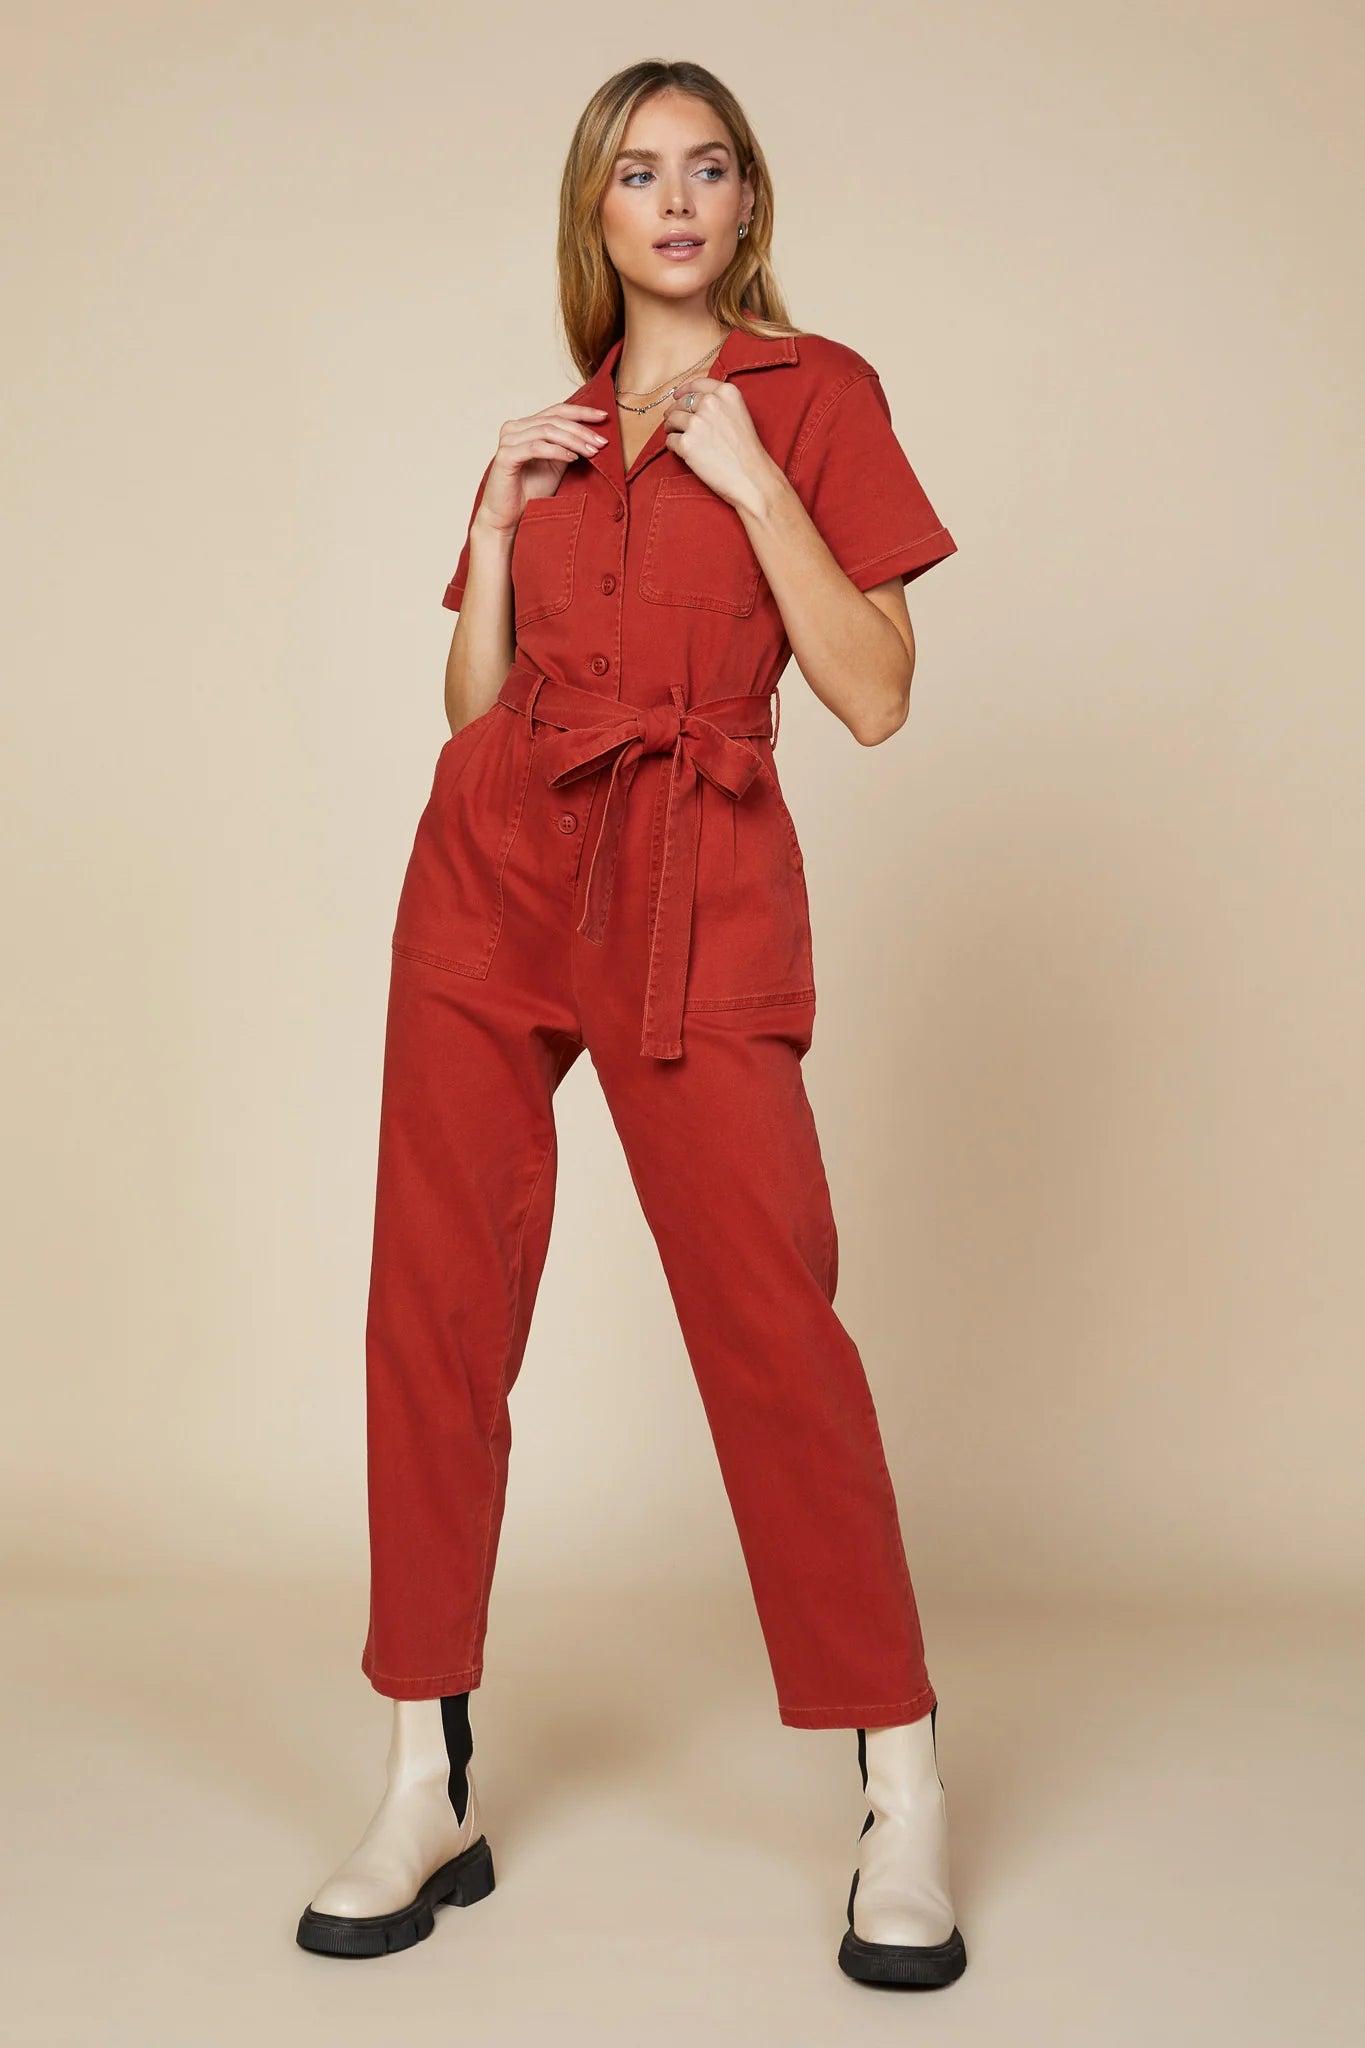 Womens Red Utility Jumpsuit | Peacocks